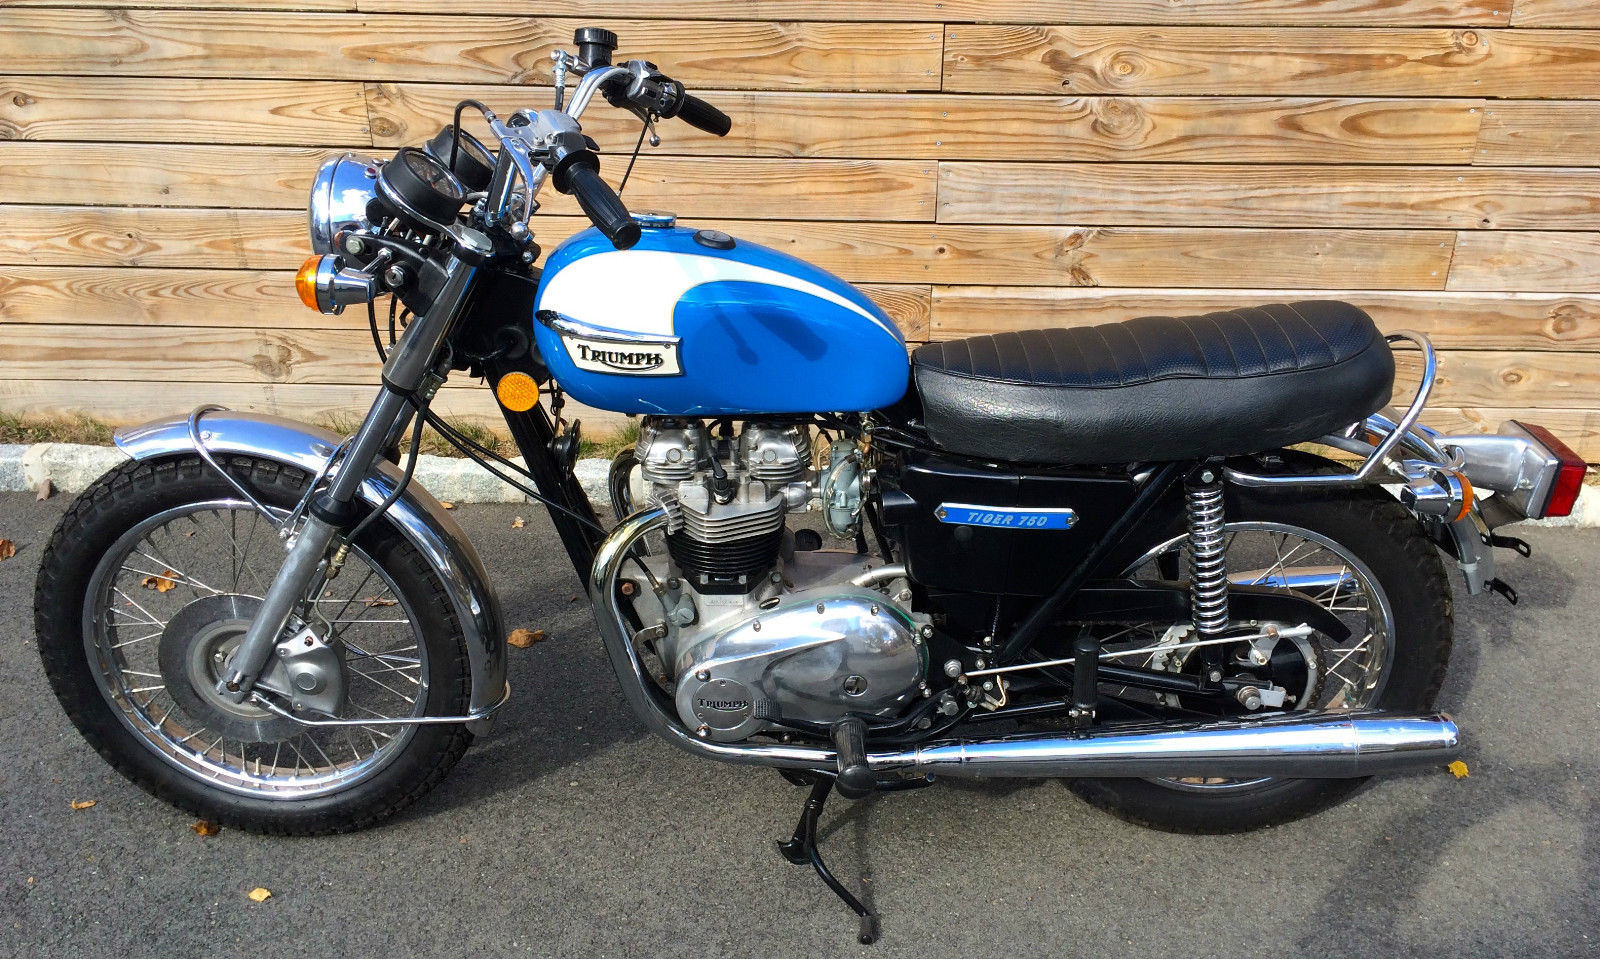 Triumph Tiger - 1973 - Left Side View, Transmission Cover, Triumph Tiger Badge, Seat and Reflector.